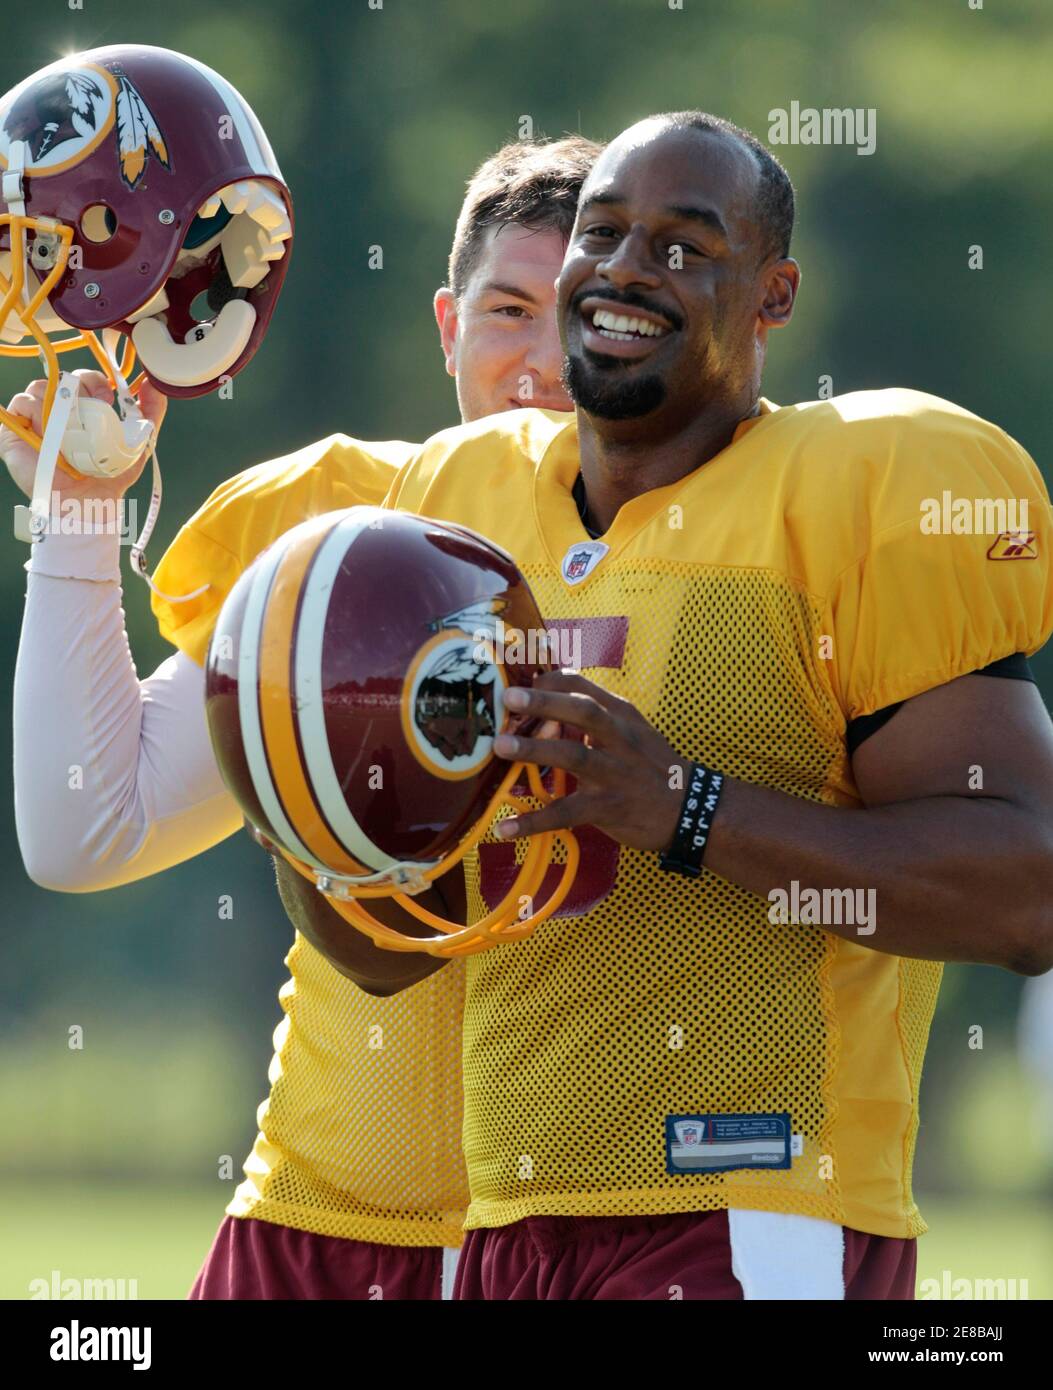 Washington Redskins starting quarterback Donovan McNabb, (R) formerly of the Philadelphia Eagles, smiles during the second day of their NFL football training camp in Ashburn, Virginia July 30, 2010. Redskins' backup quarterback Rex Grossman is at left.                     REUTERS/Gary Cameron (UNITED STATES - Tags: SPORT FOOTBALL) Stock Photo